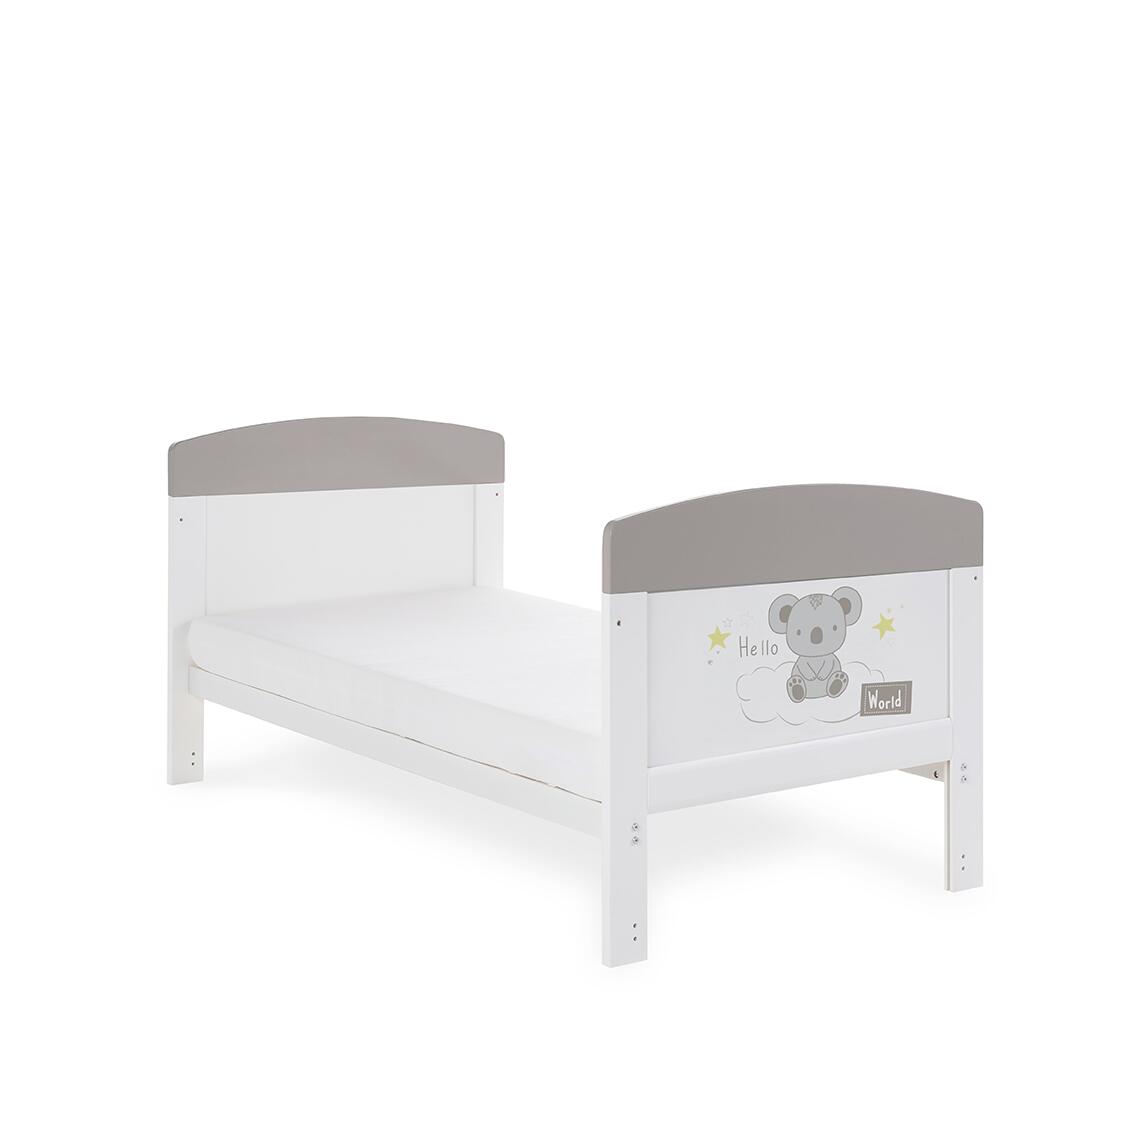 OBaby Grace Inspire Hello World Koala Cot Bed toddler